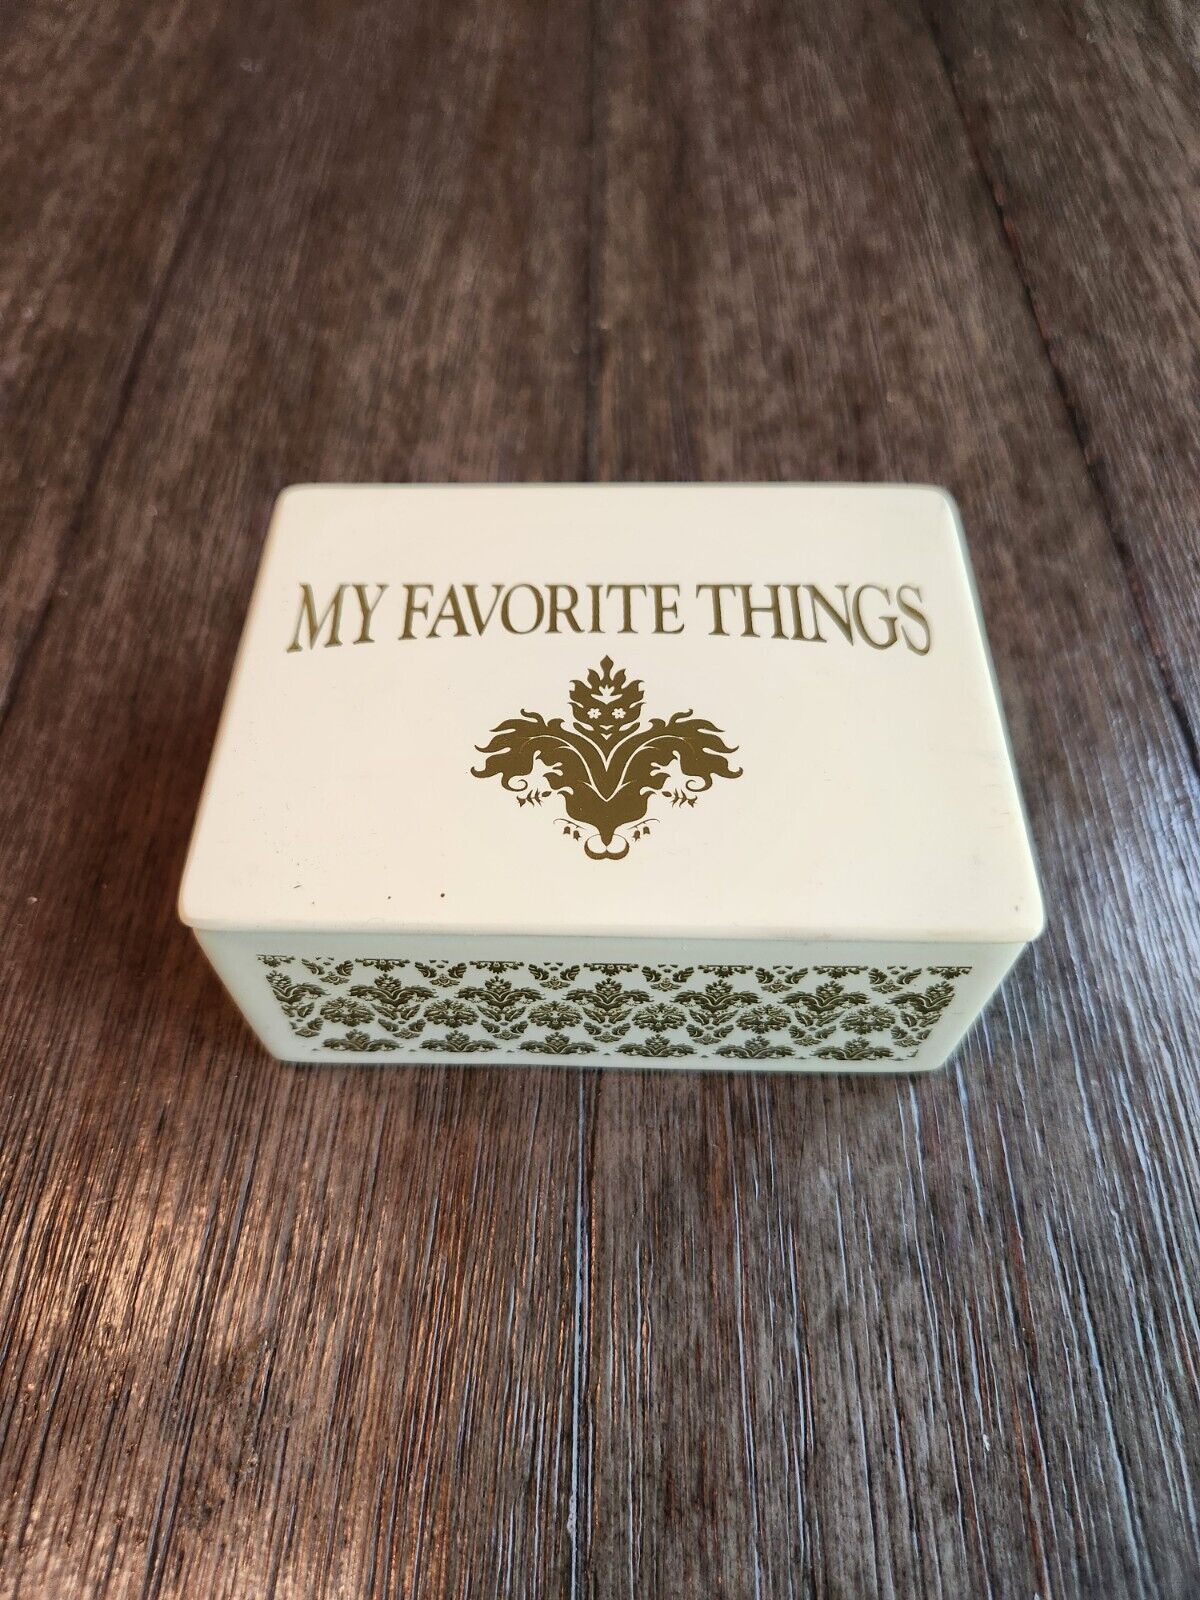 The Sound Of Music 45th Anniv. Music Box “My Favorite Things”. Collectible Works